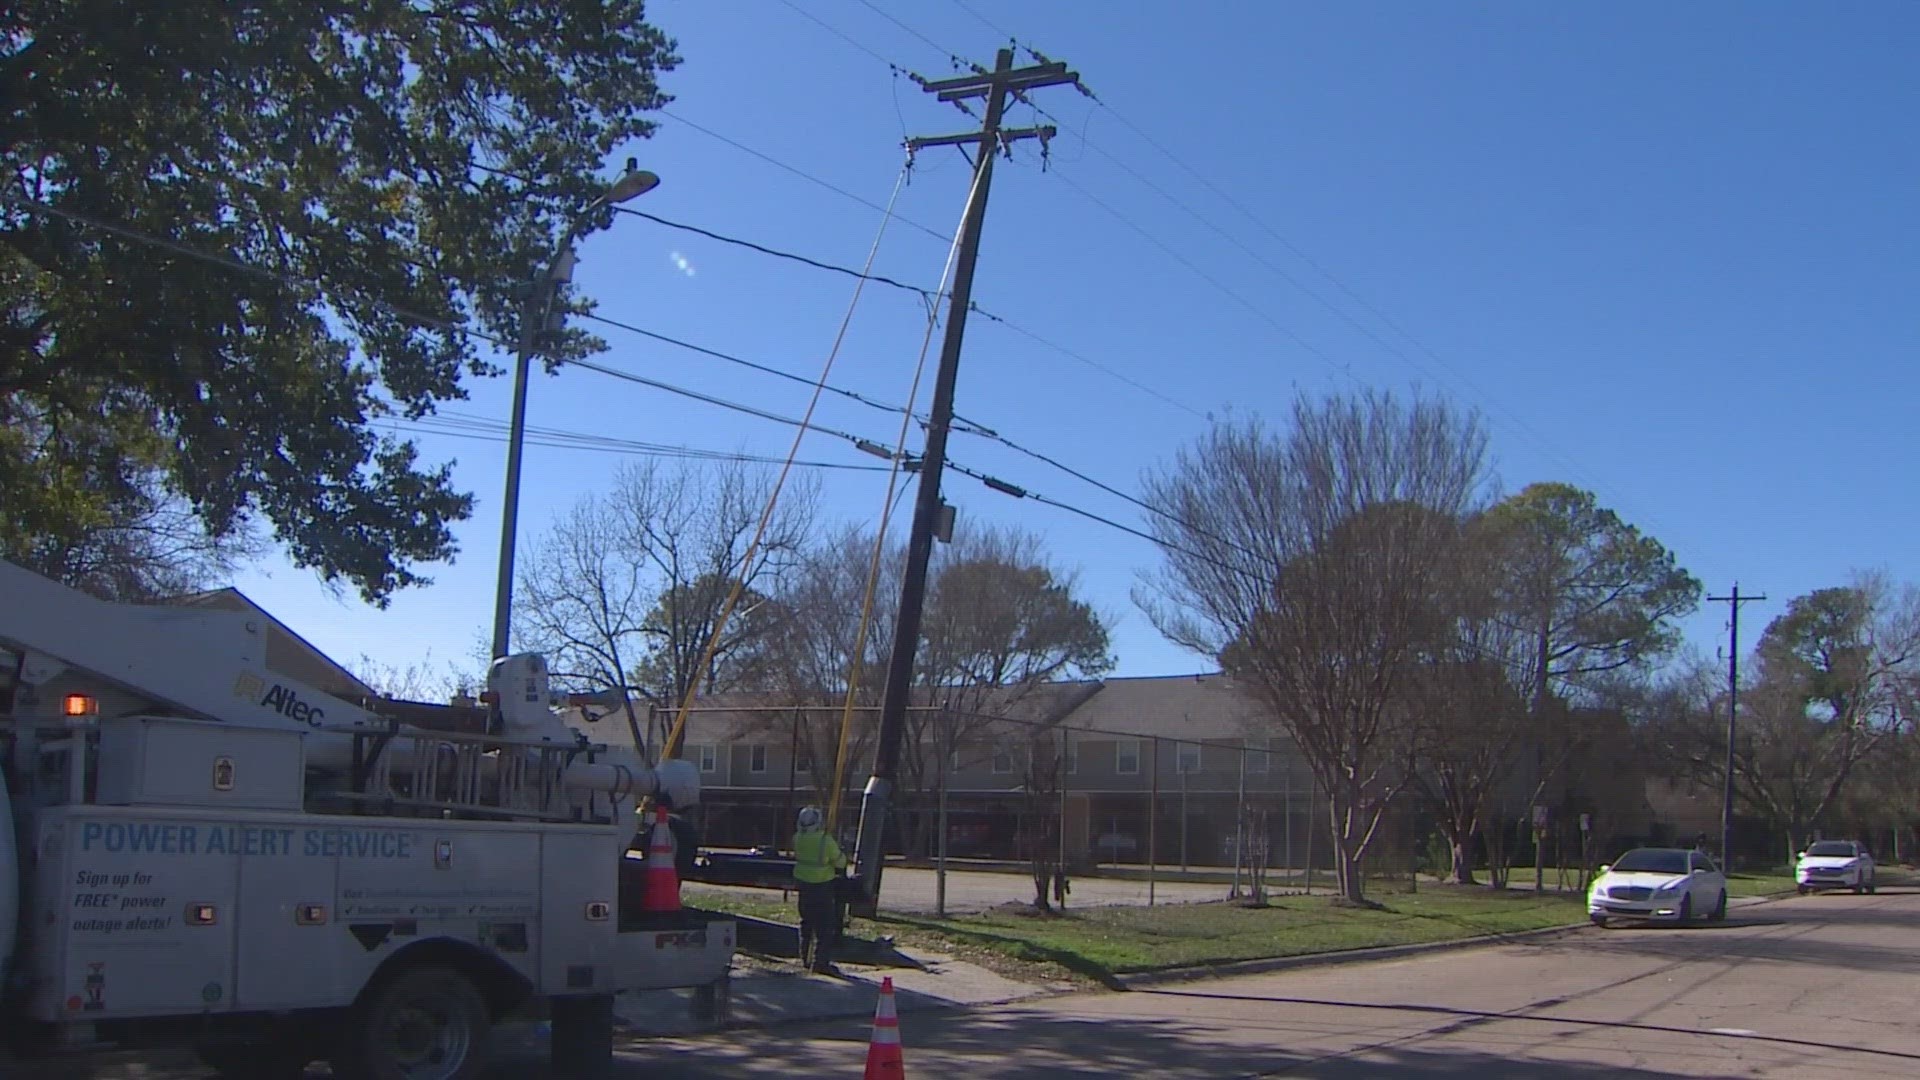 CenterPoint said they restored power to about 44,000 customers between Monday at 5 p.m. and Tuesday at 5 p.m.